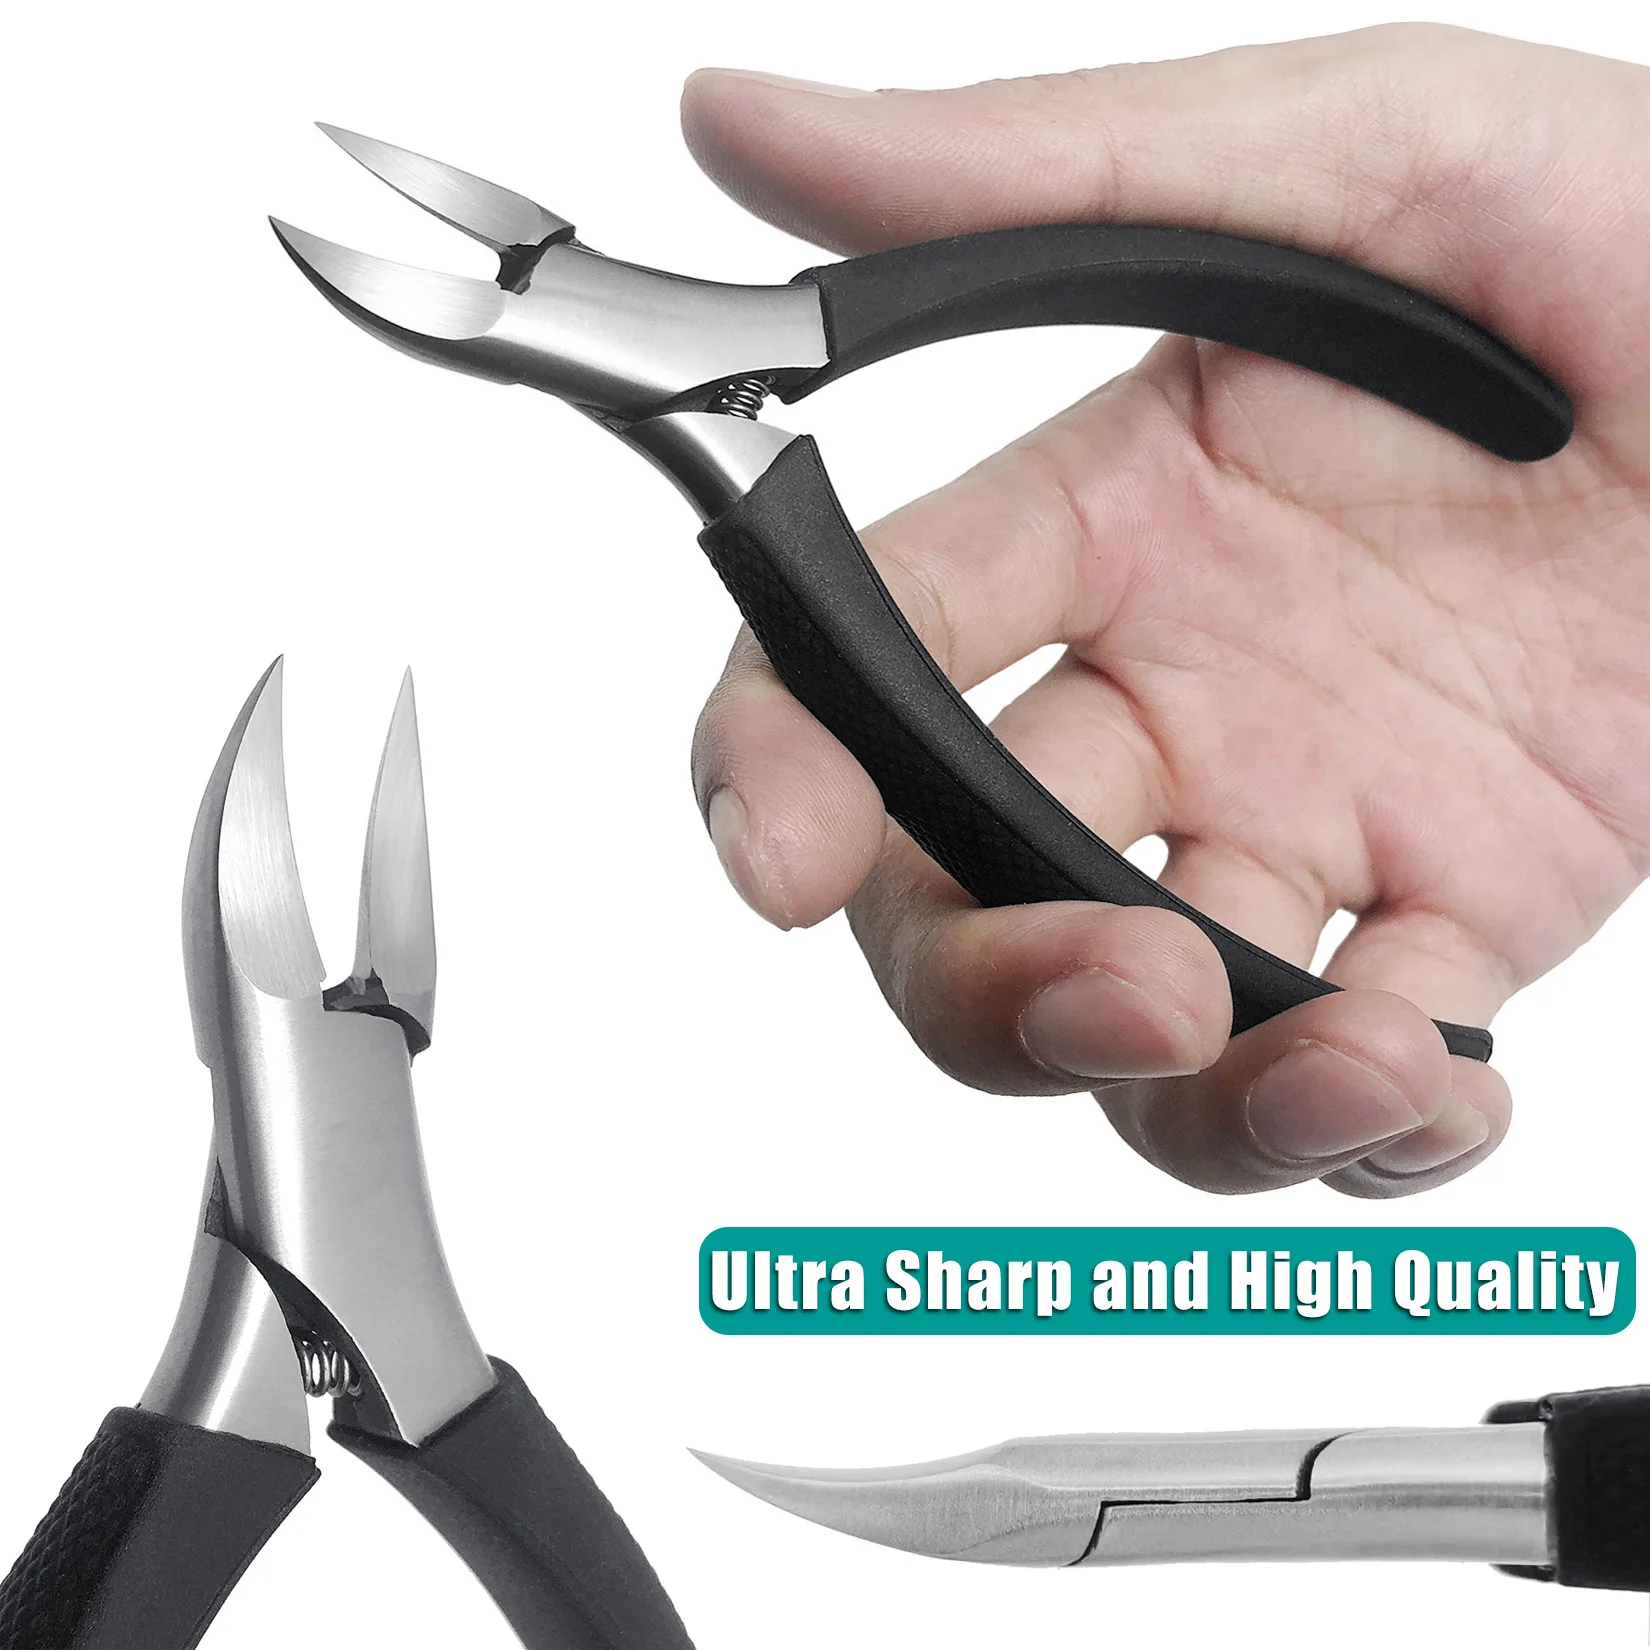 Toenail Clippers For Thick Nails Thick Toenail Clippers High